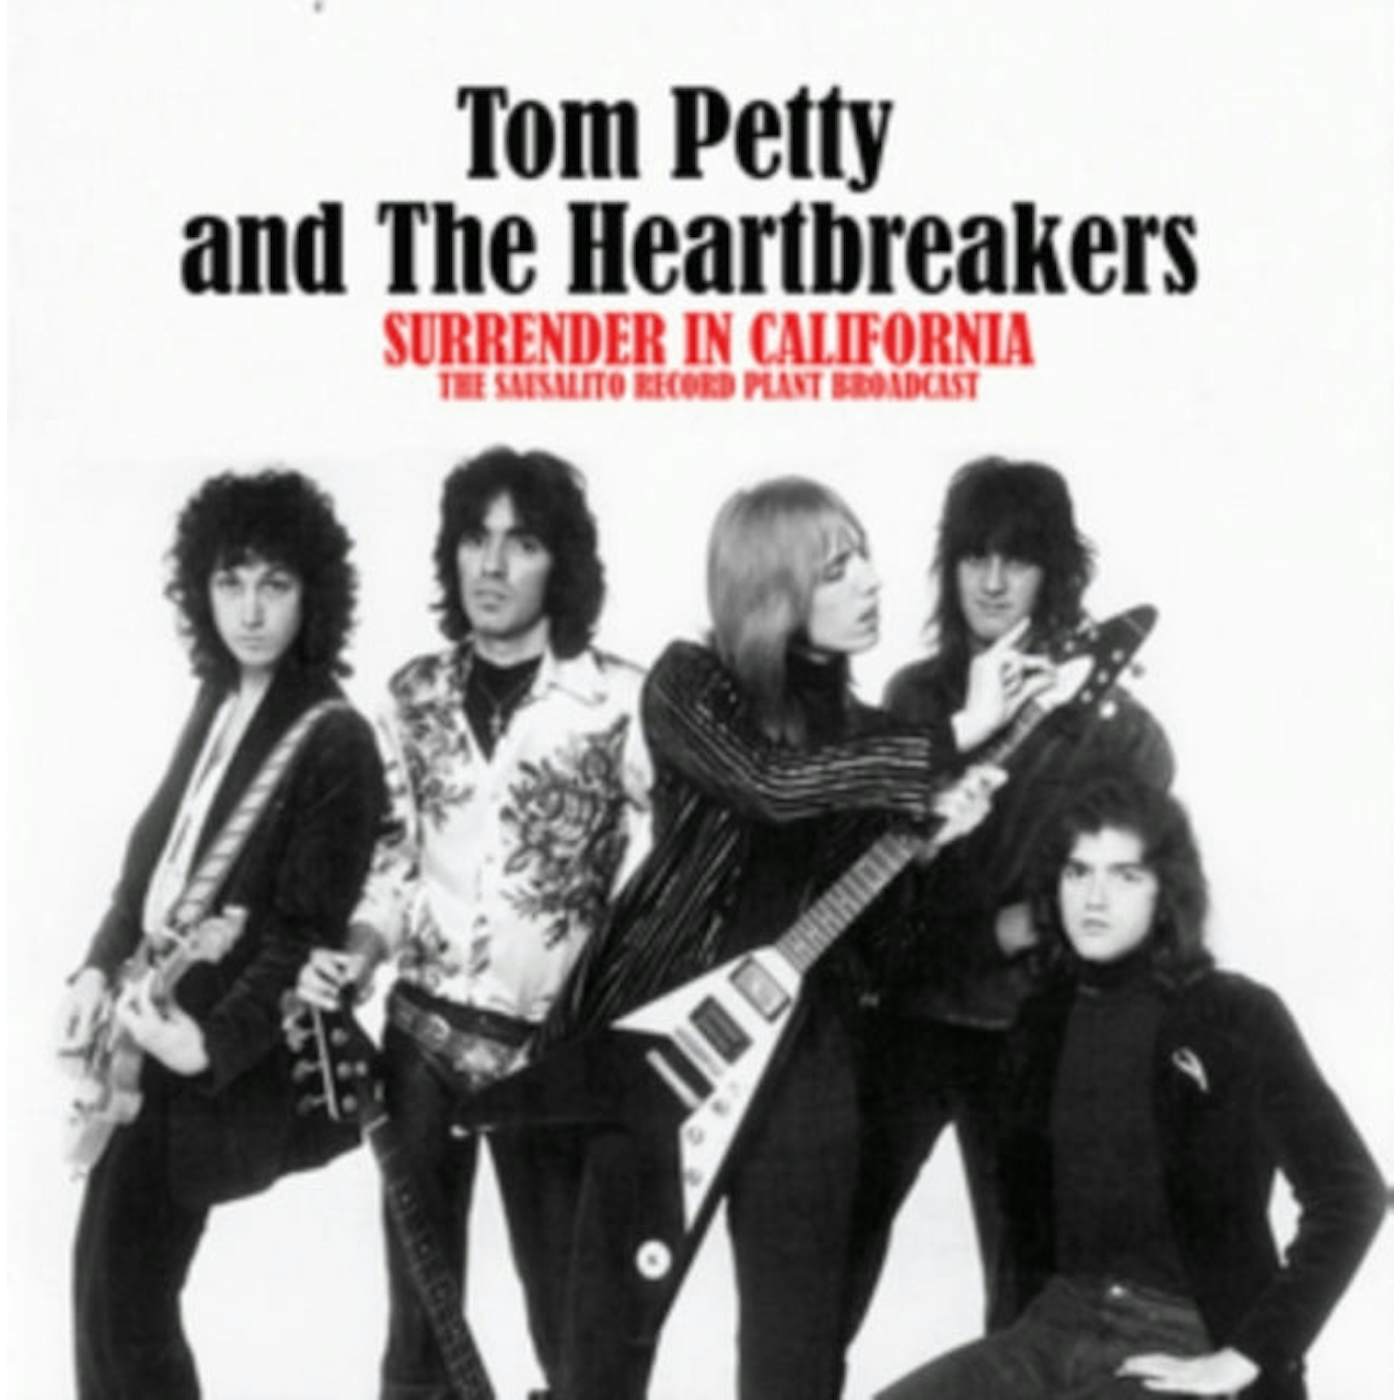 Tom Petty and the Heartbreakers LP - Surrender In California: The Sausalito Record Plant Broadcast (Vinyl)